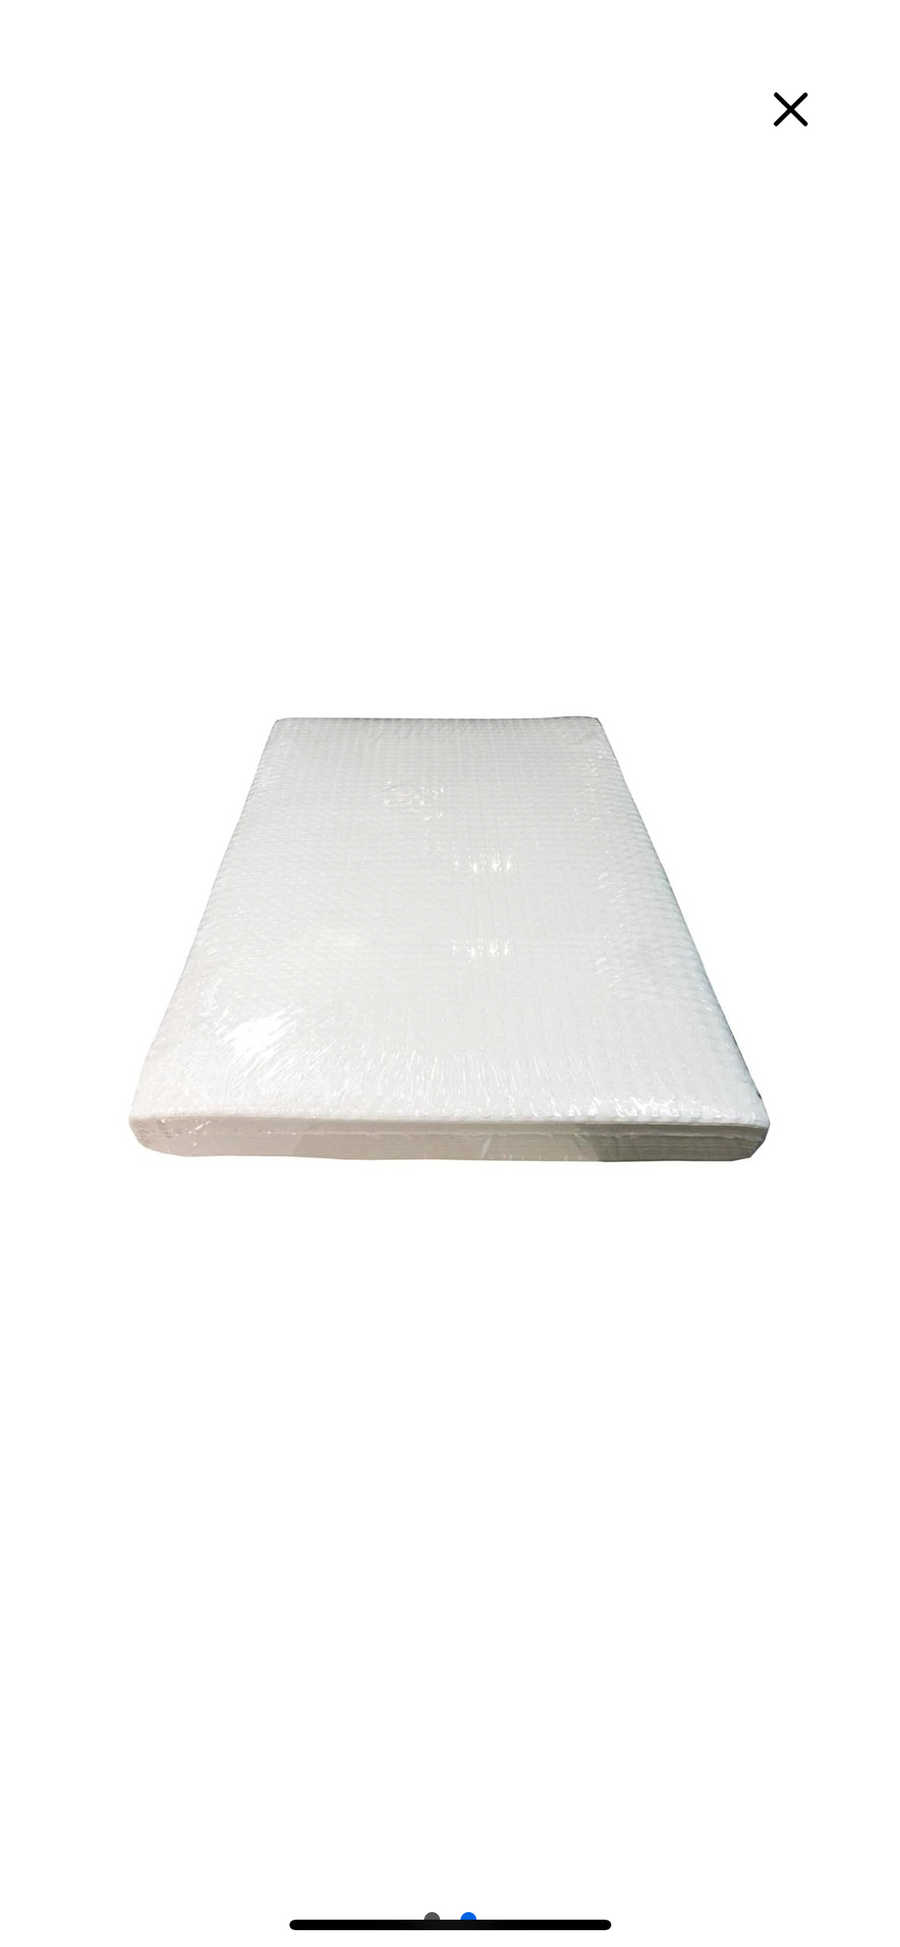 Cello Clinical Barrier Pad 315mm x 500mm 100 Pieces